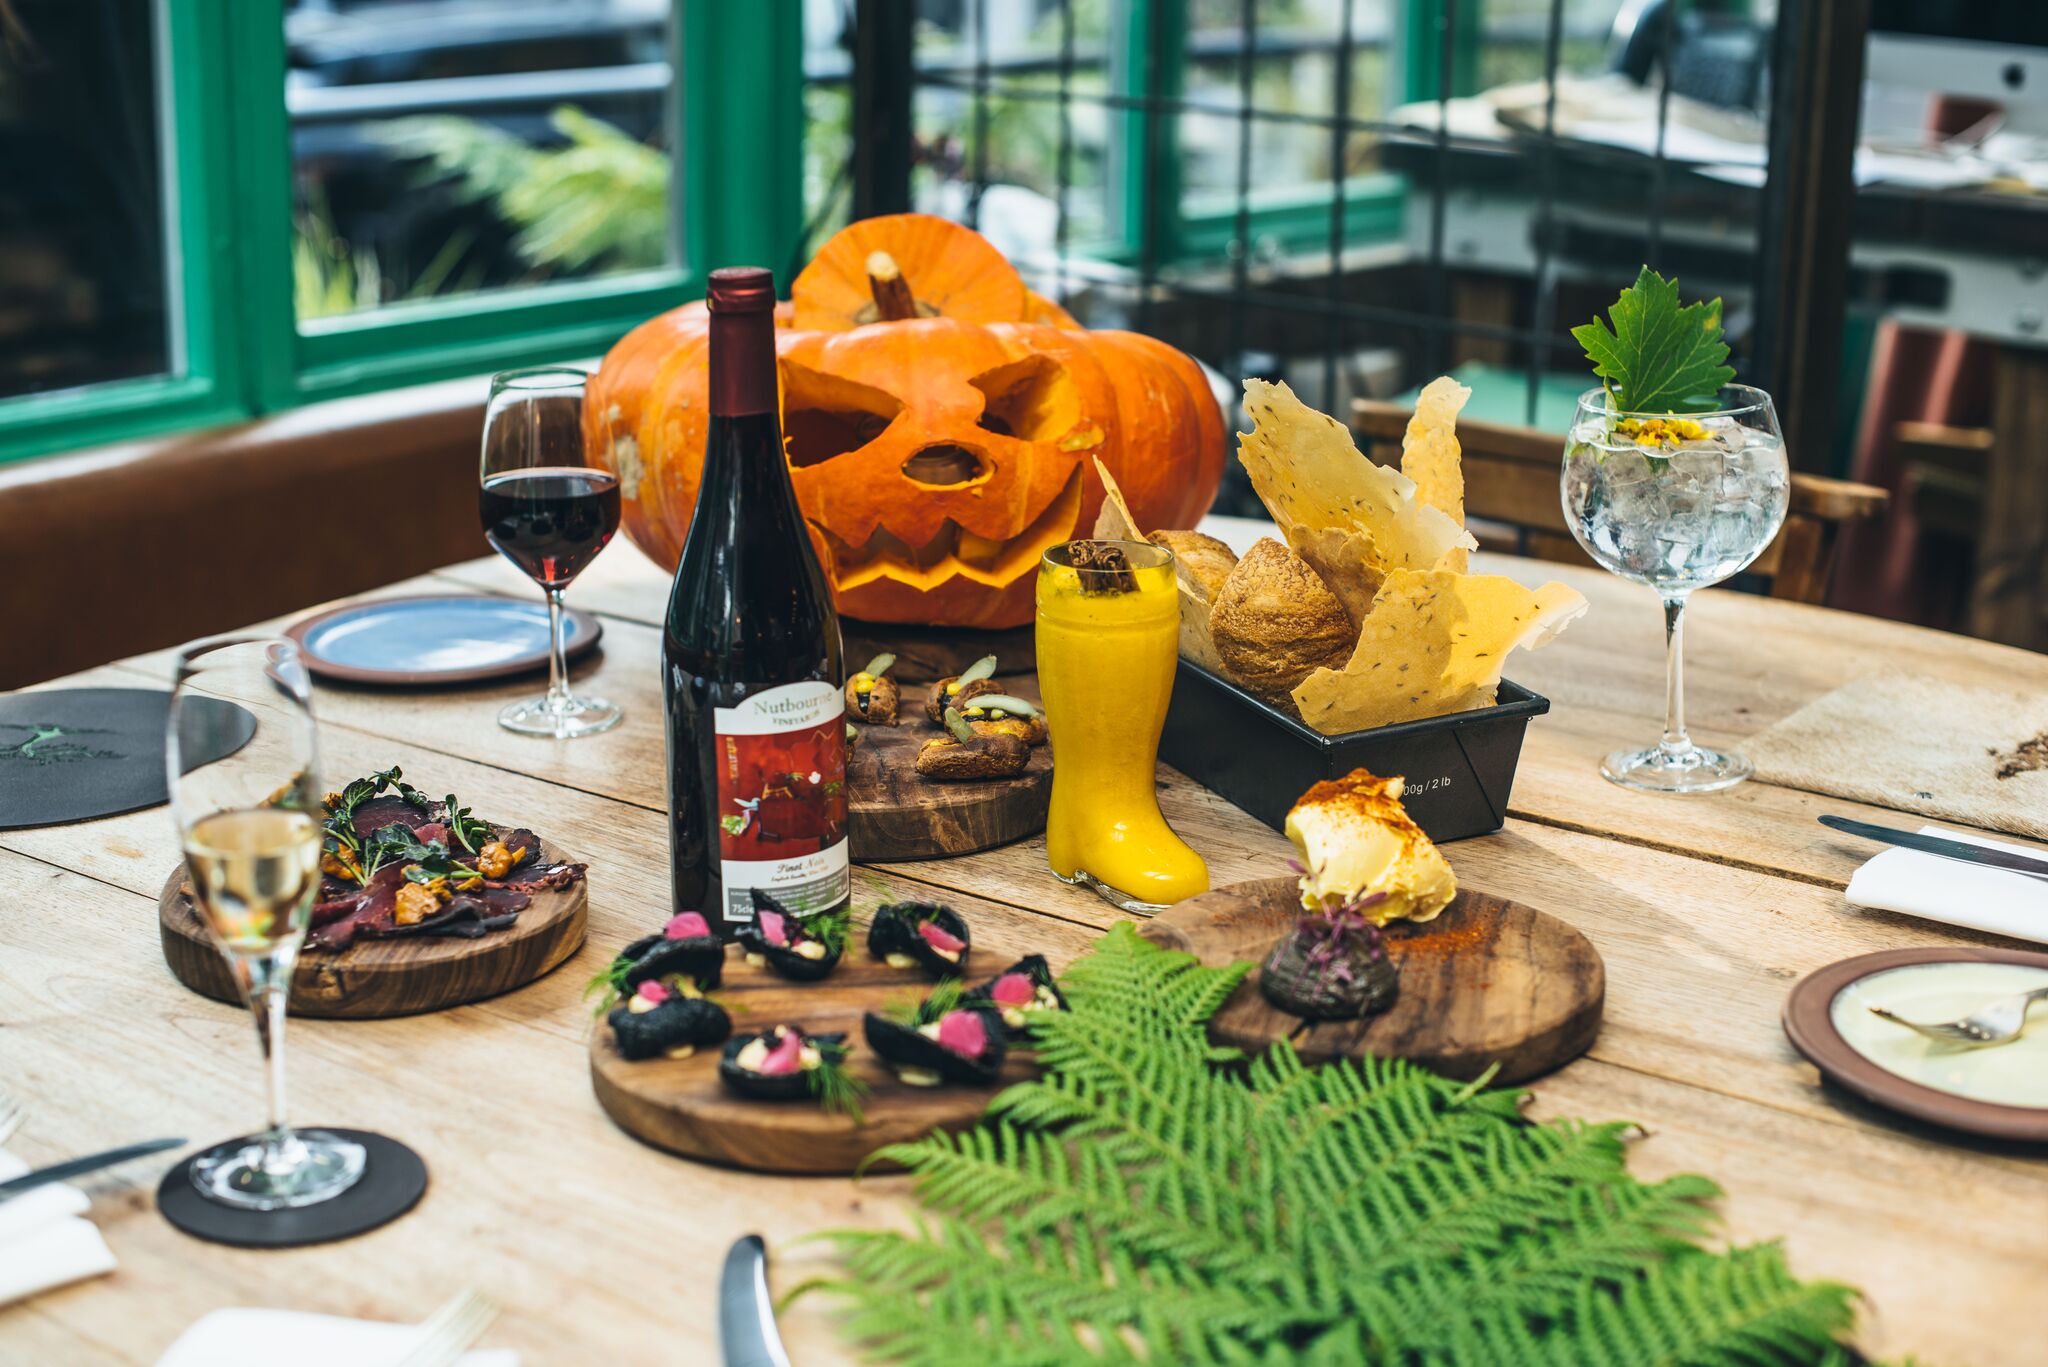 Nutty Halloween at Nutbourne!